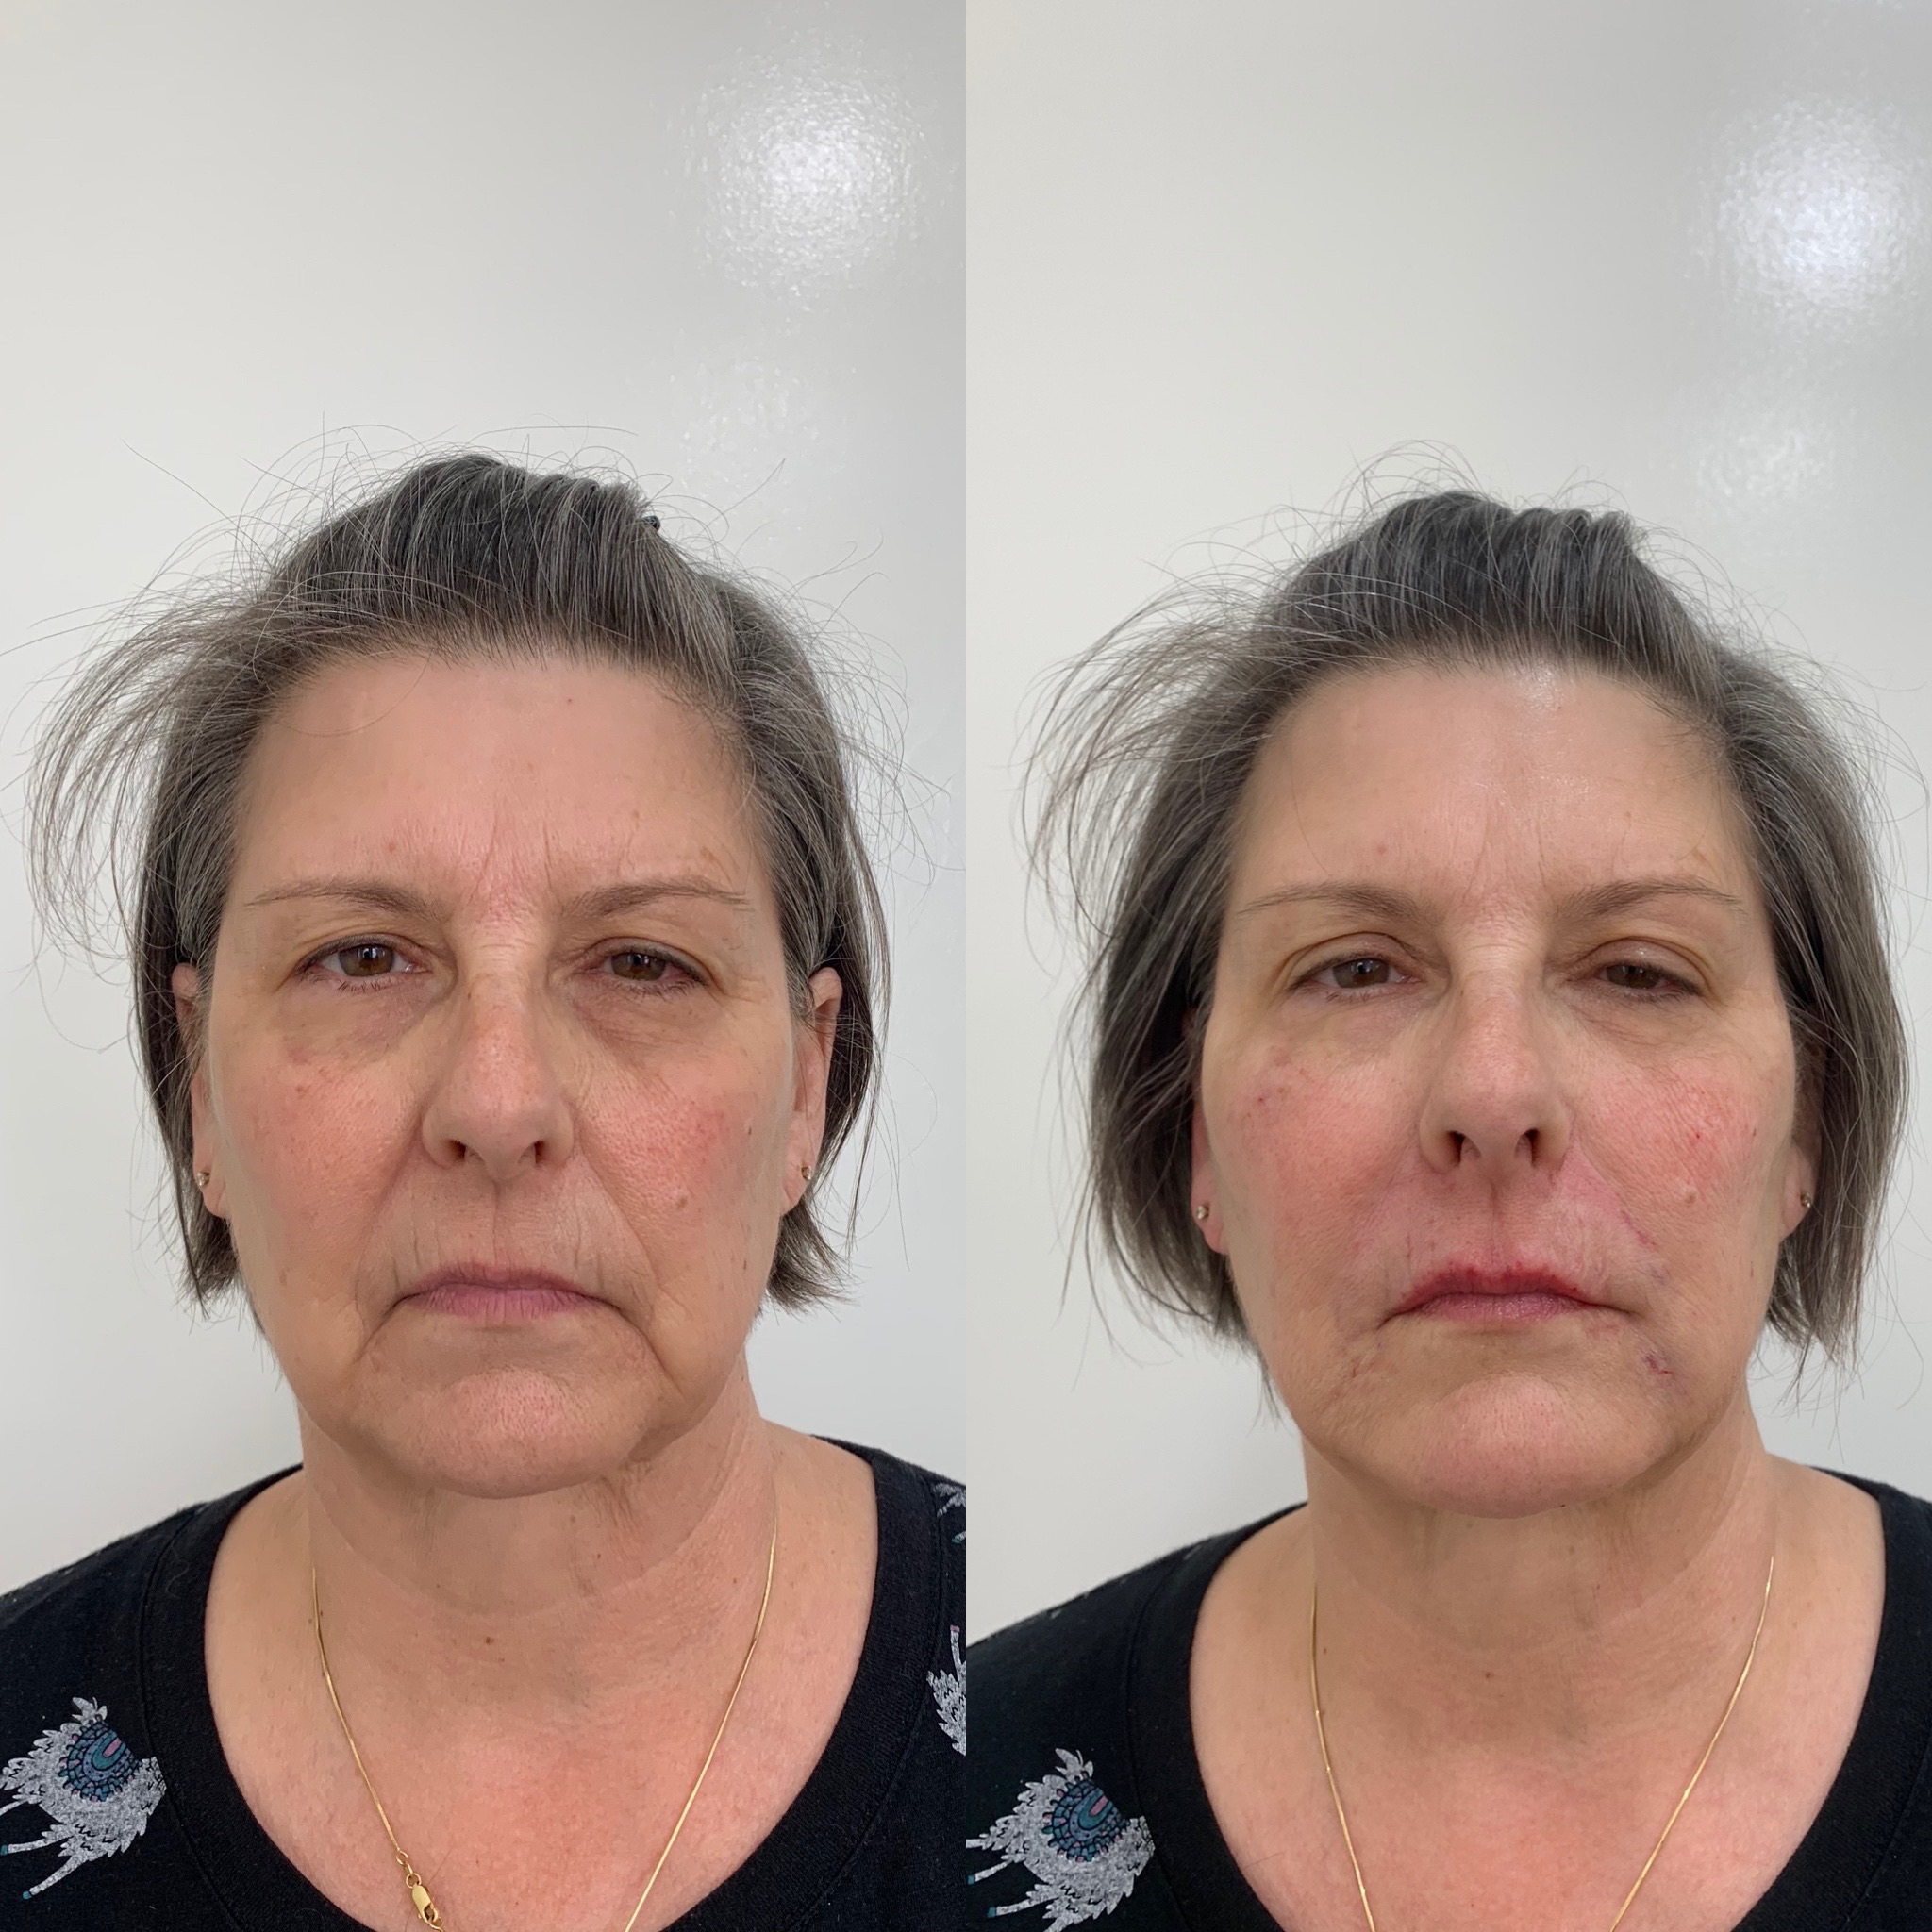 Before and After Panfacial Treatment | Beauty Boost Med Spa in Newport Beach, CA